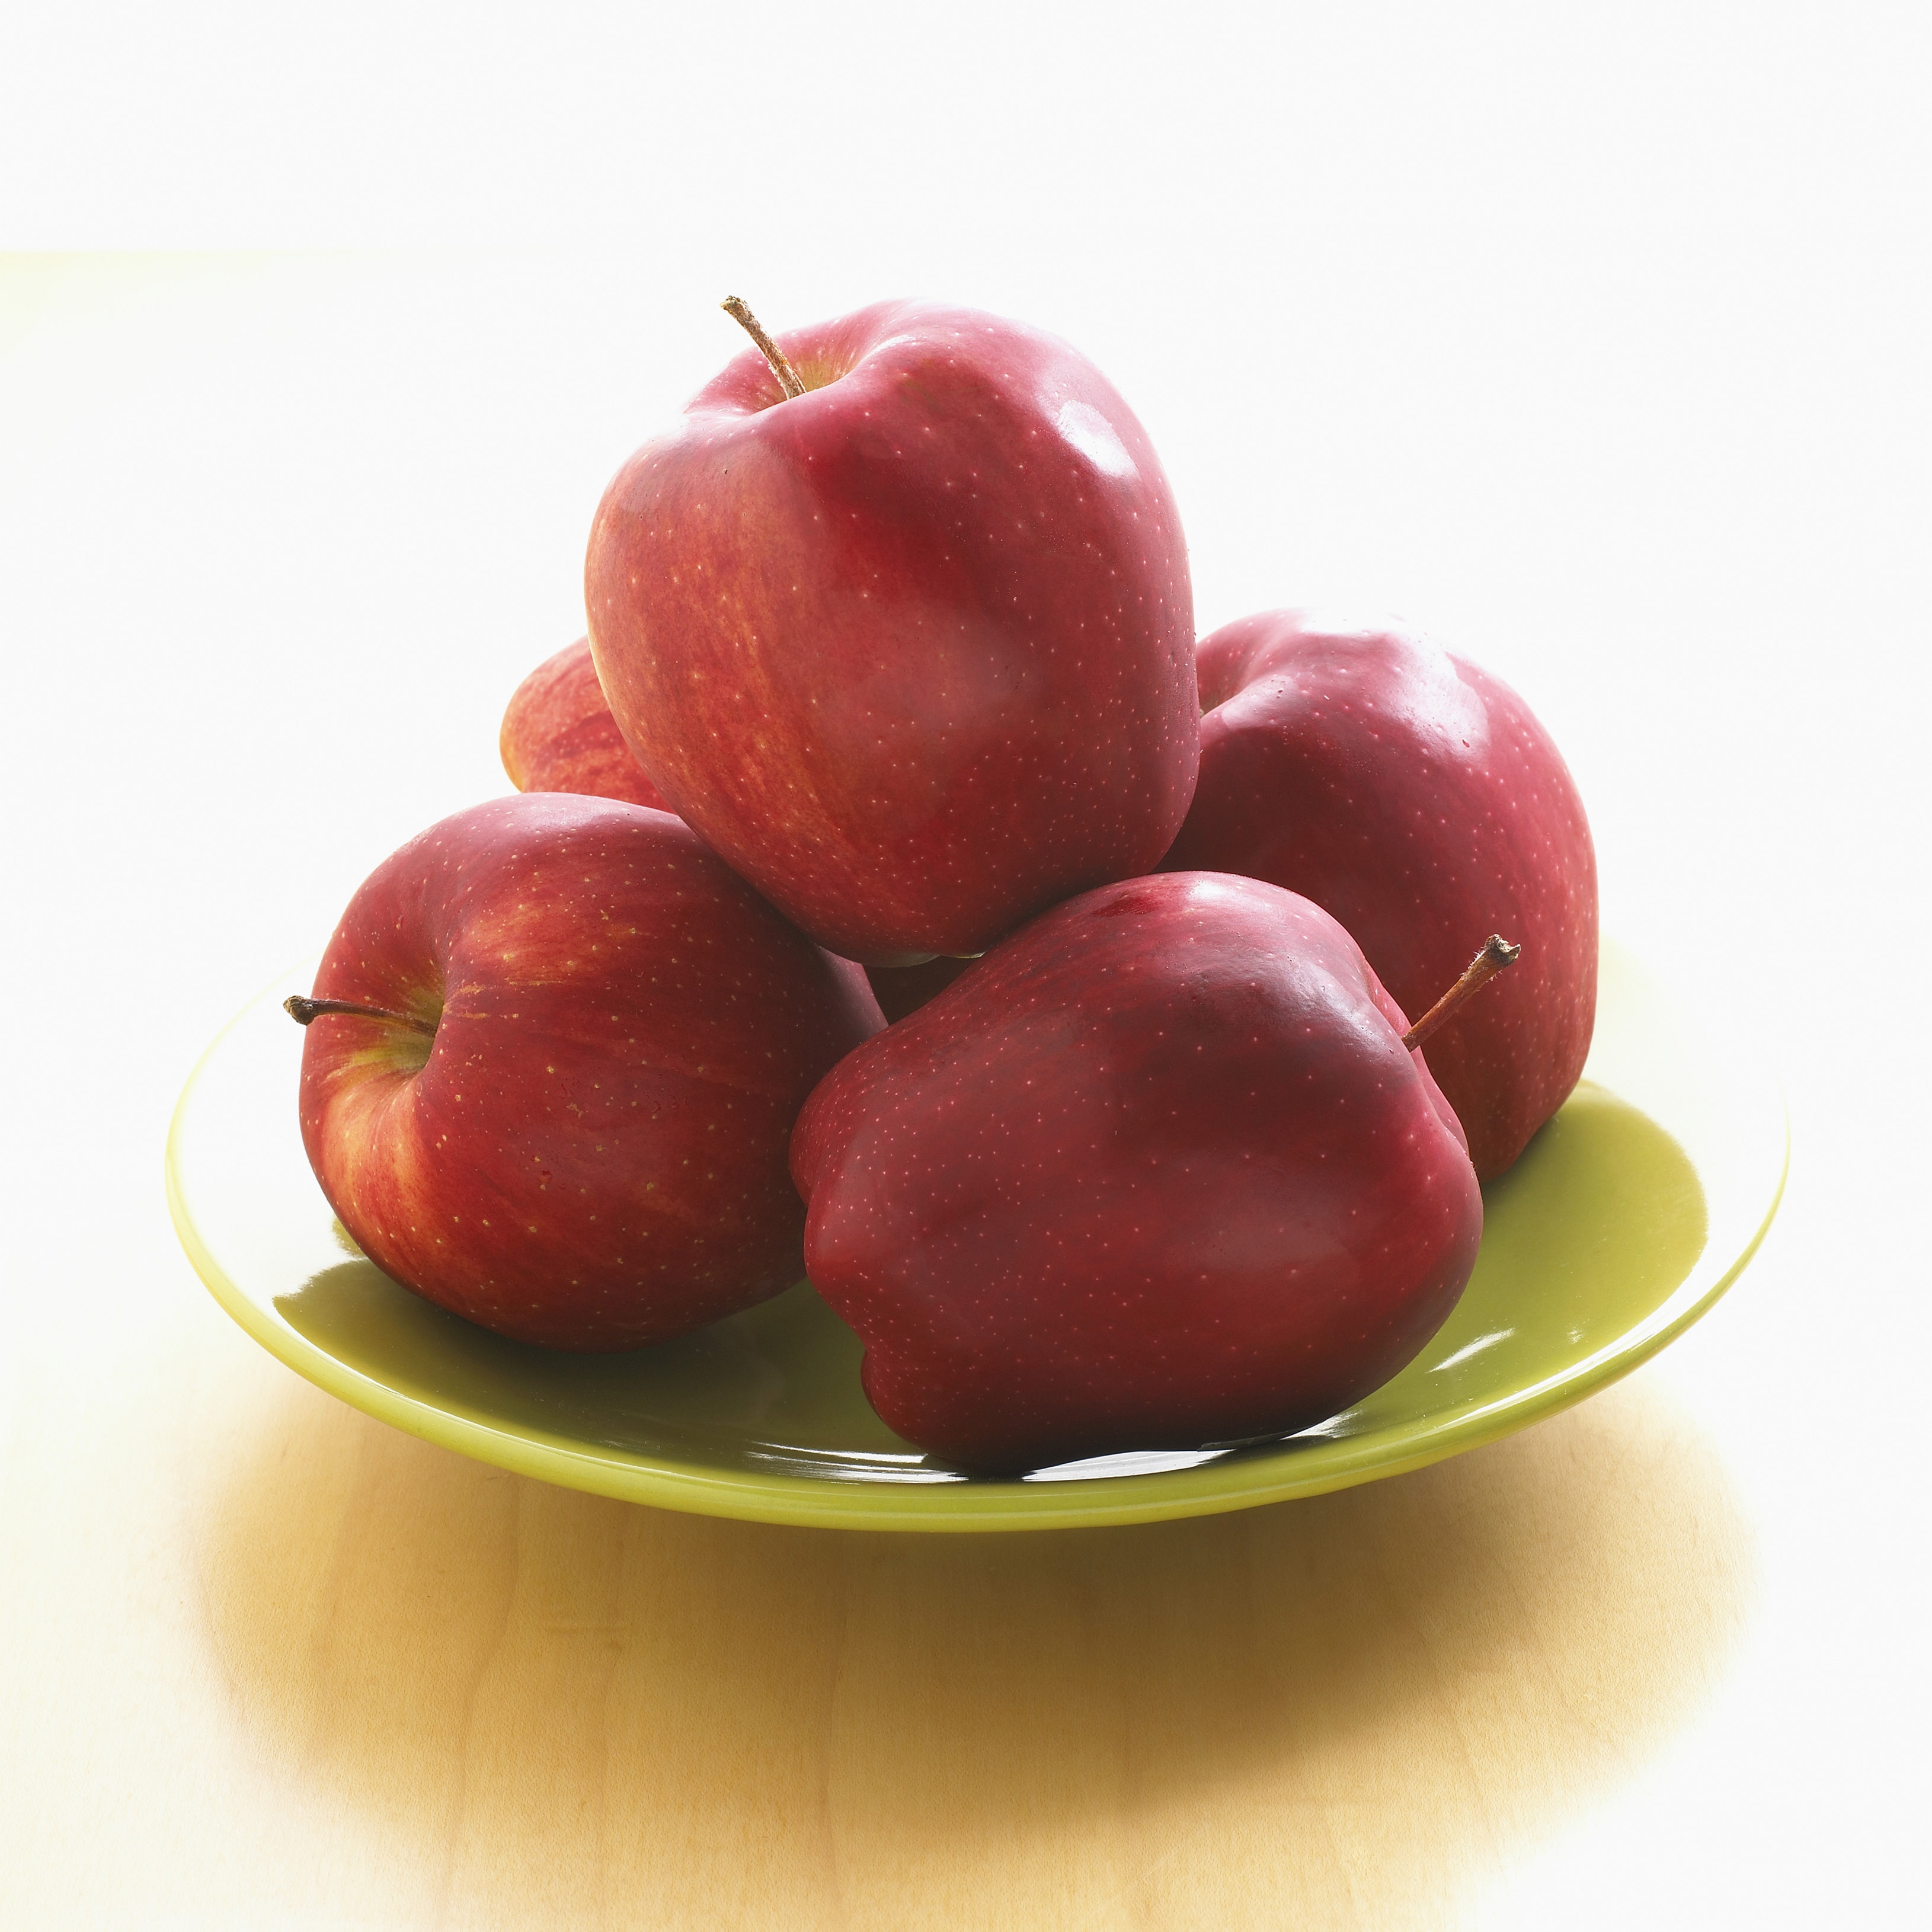 Red apples photo